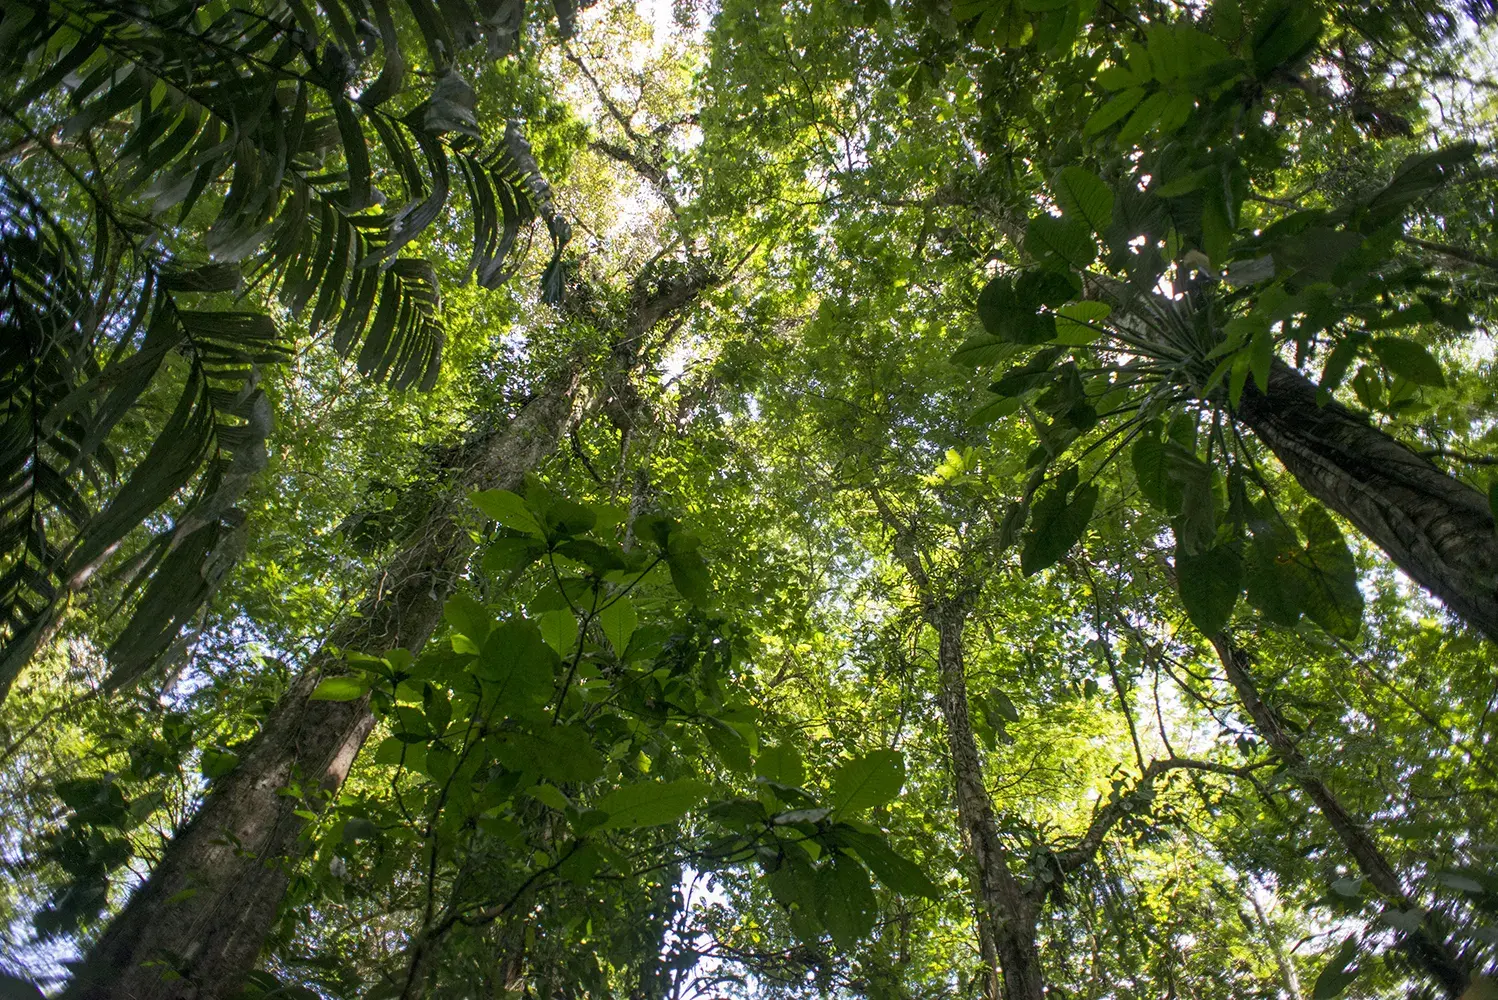 Dominican Republic pushes forward with its REDD+ benefit sharing plan